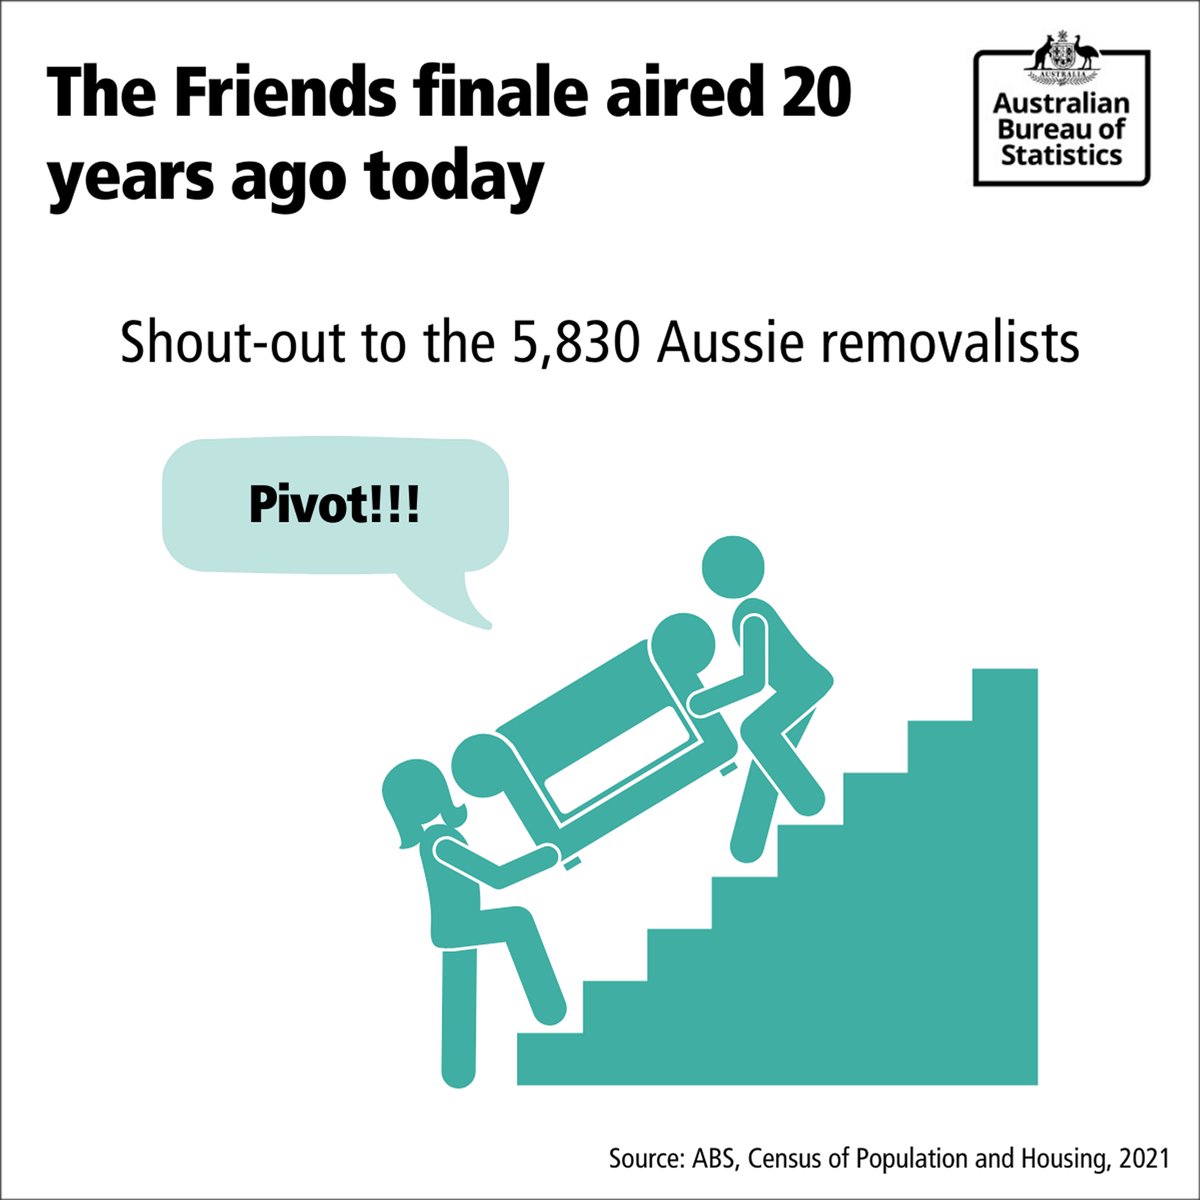 It’s been 20 years since the #Friends finale aired, and could we BE any more excited for some stats? We’re giving a shout-out to the 5,830 furniture removalists in Australia. What’s your favourite Friends moment? #PivotPivotPivot